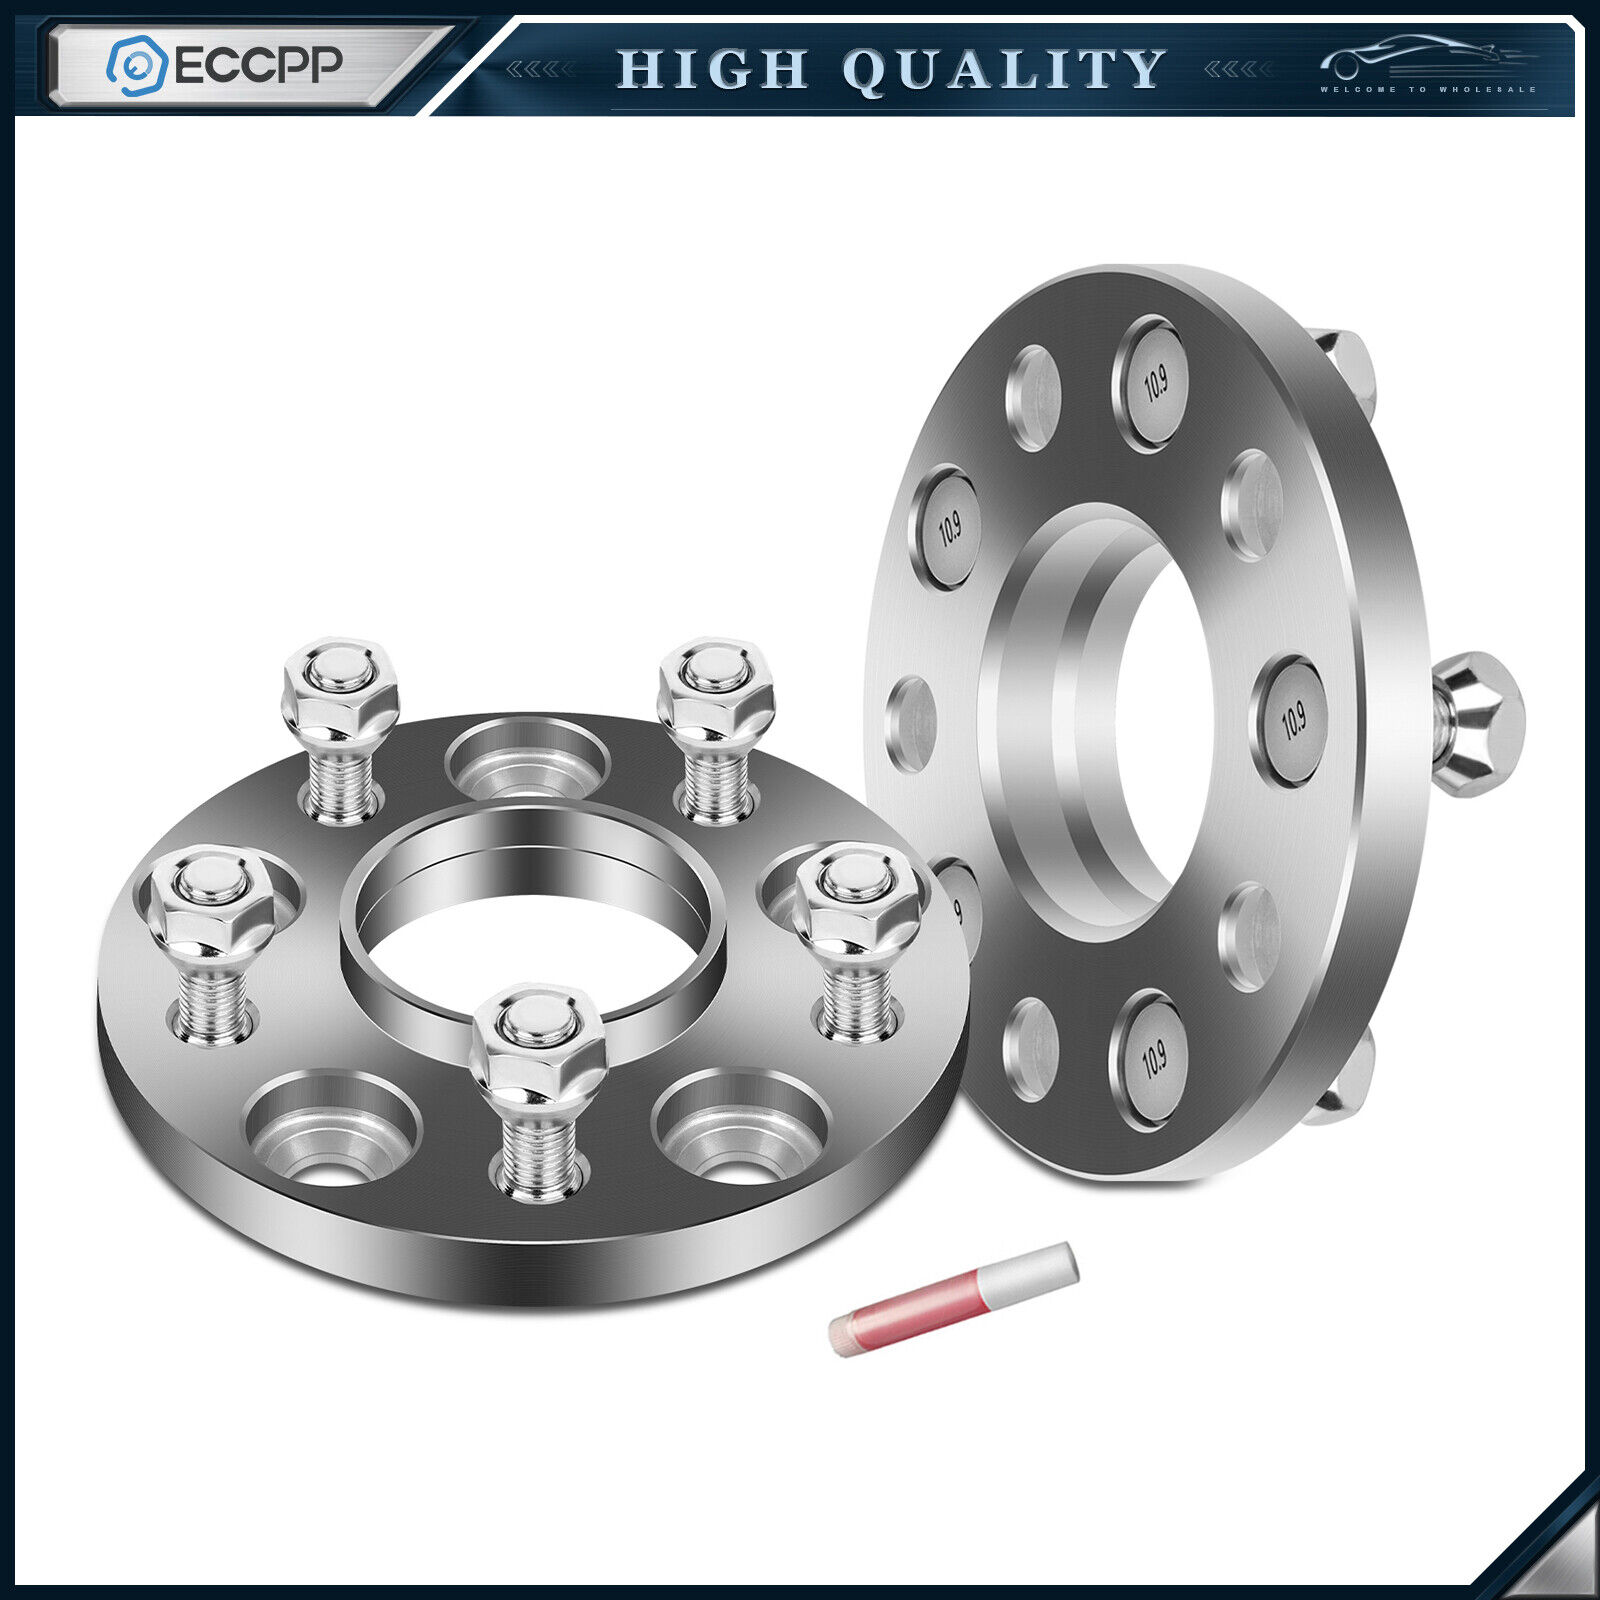 2P 15mm 5x4.5 Hub Centric Wheel Spacers For Nissan 350Z 2003-2009 370Z 2009-2023